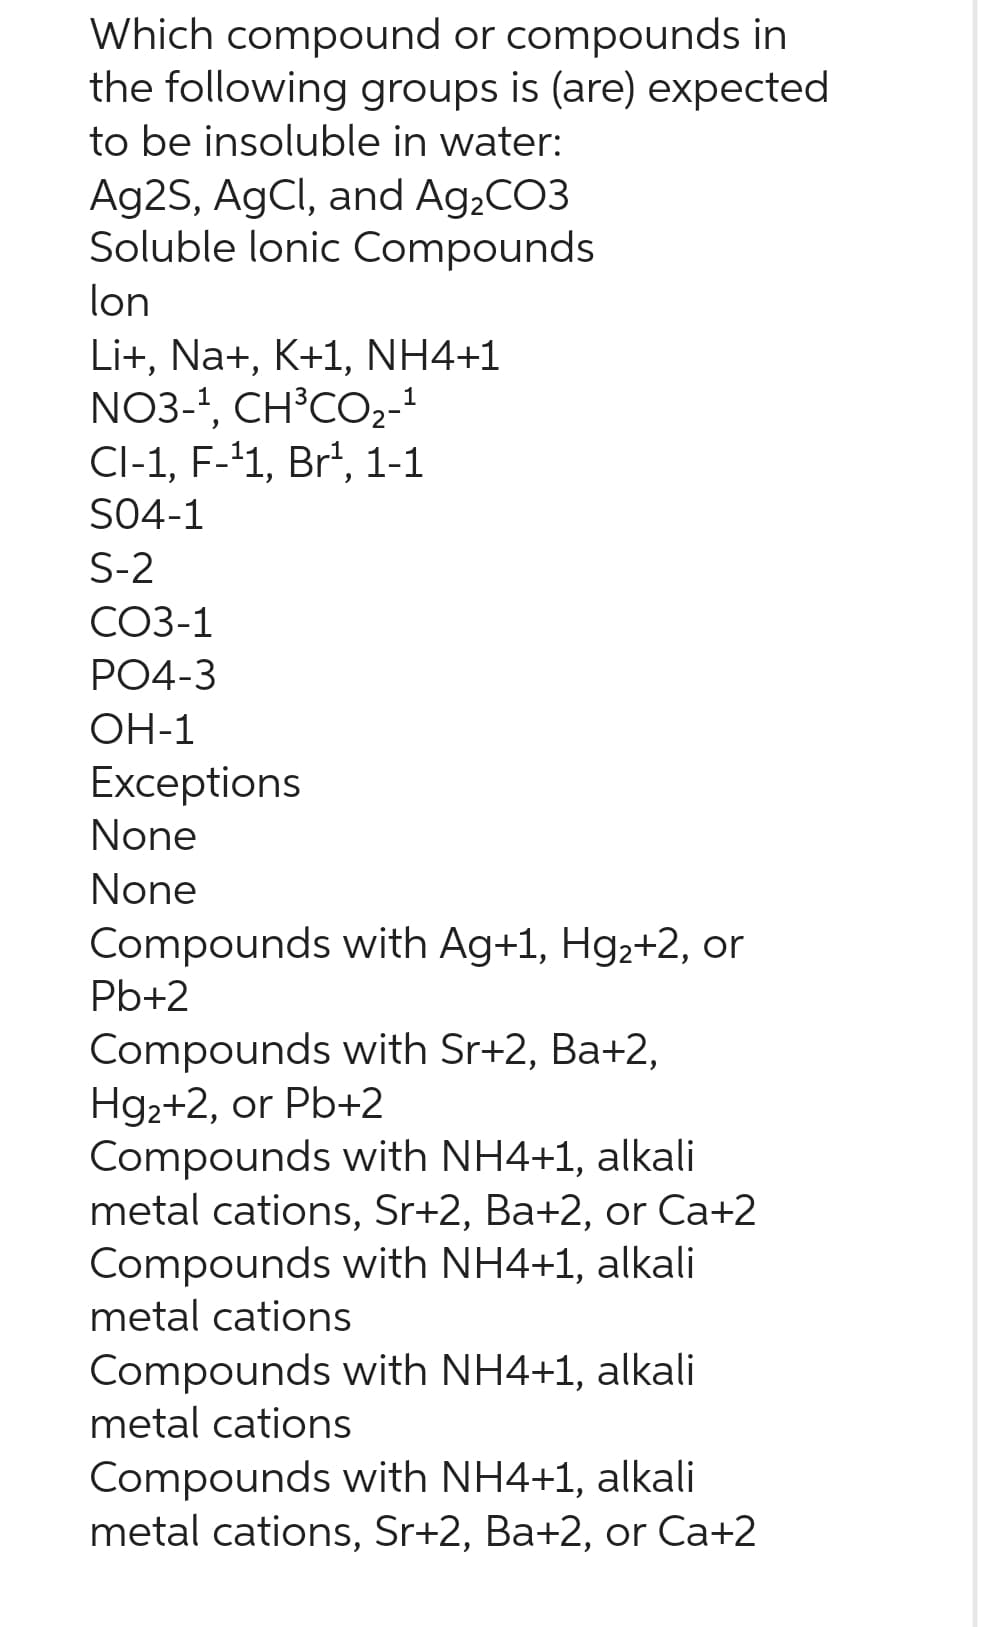 Which compound or compounds in
the following groups is (are) expected
to be insoluble in water:
Ag2S, AgCl, and Ag₂CO3
Soluble lonic Compounds
lon
Li+, Na+, K+1, NH4+1
1
NO3-¹, CH³CO₂-¹
CI-1, F-¹1, Br¹, 1-1
SO4-1
S-2
CO3-1
PO4-3
OH-1
Exceptions
None
None
Compounds with Ag+1, Hg2+2, or
Pb+2
Compounds with Sr+2, Ba+2,
Hg₂+2, or Pb+2
Compounds with NH4+1, alkali
metal cations, Sr+2, Ba+2, or Ca+2
Compounds with NH4+1, alkali
metal cations
Compounds with NH4+1, alkali
metal cations
Compounds with NH4+1, alkali
metal cations, Sr+2, Ba+2, or Ca+2